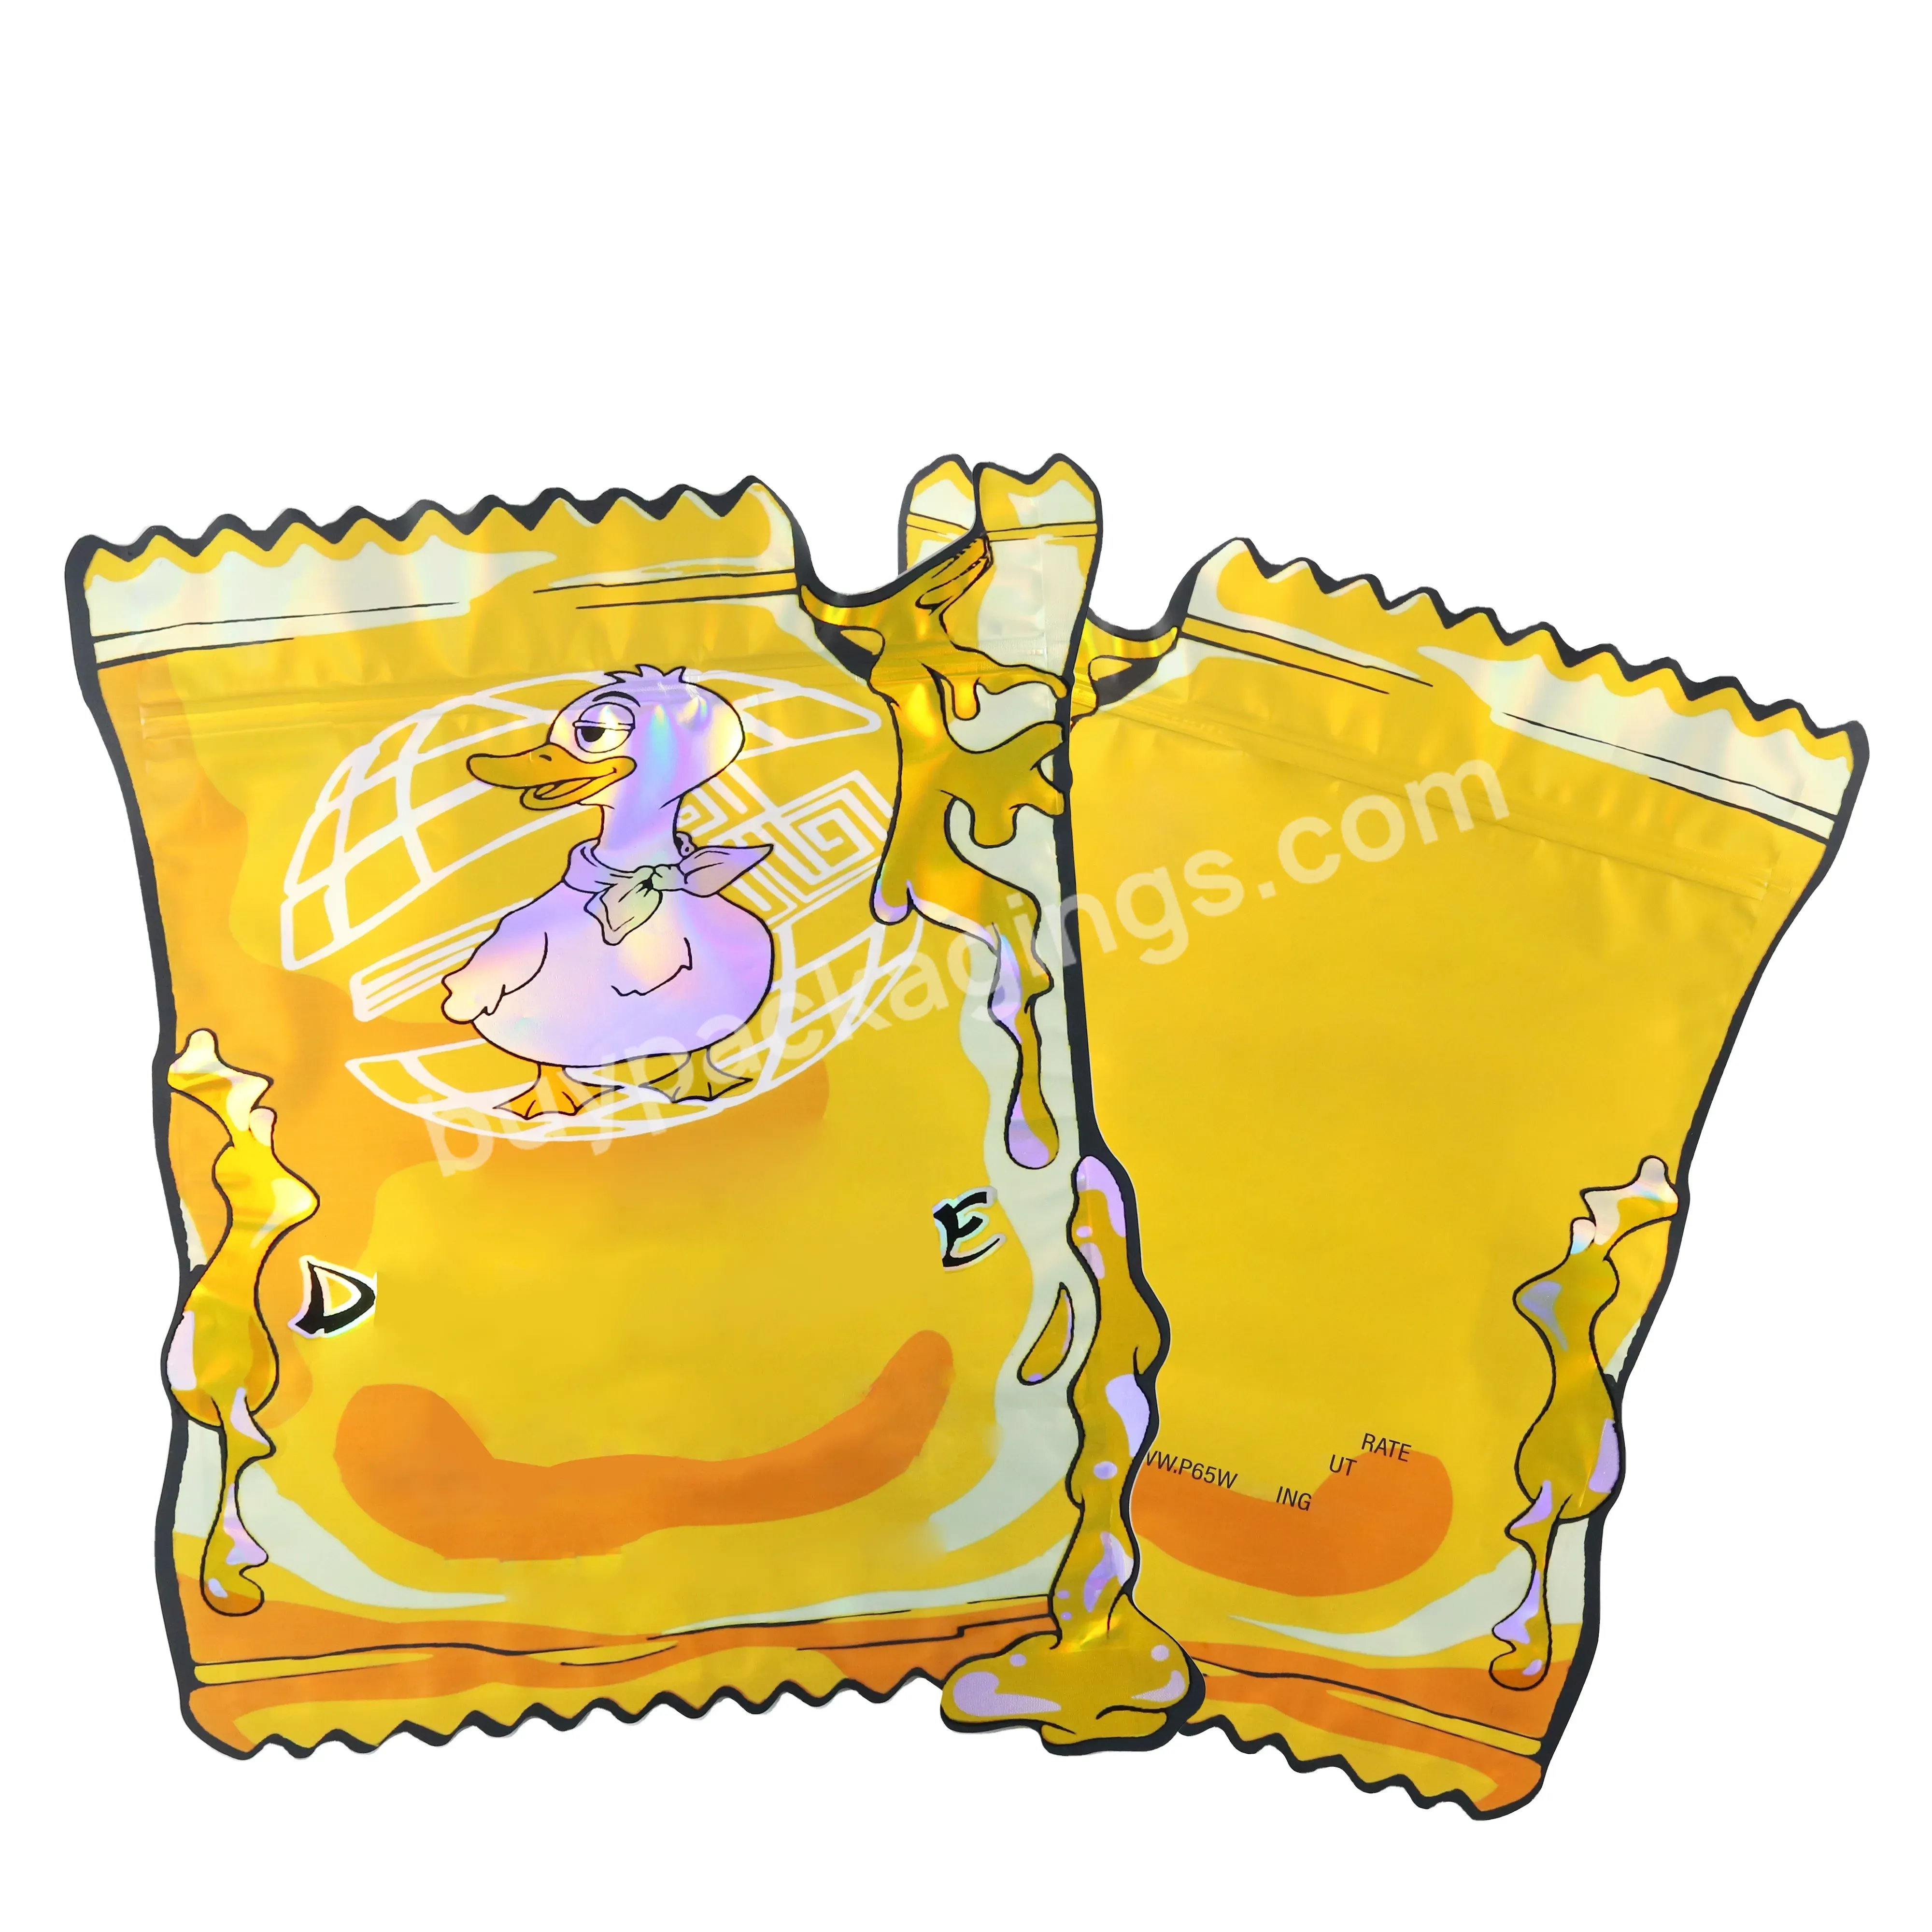 Custom Printed Holographic Smell Proof Bags Stand Up Pouch Die Cut Mylar Bag 3.5g - Buy Die Cut Mylar Bag 3.5g,Smell Proof Bags,Stand Up Pouch Mylar Bag.